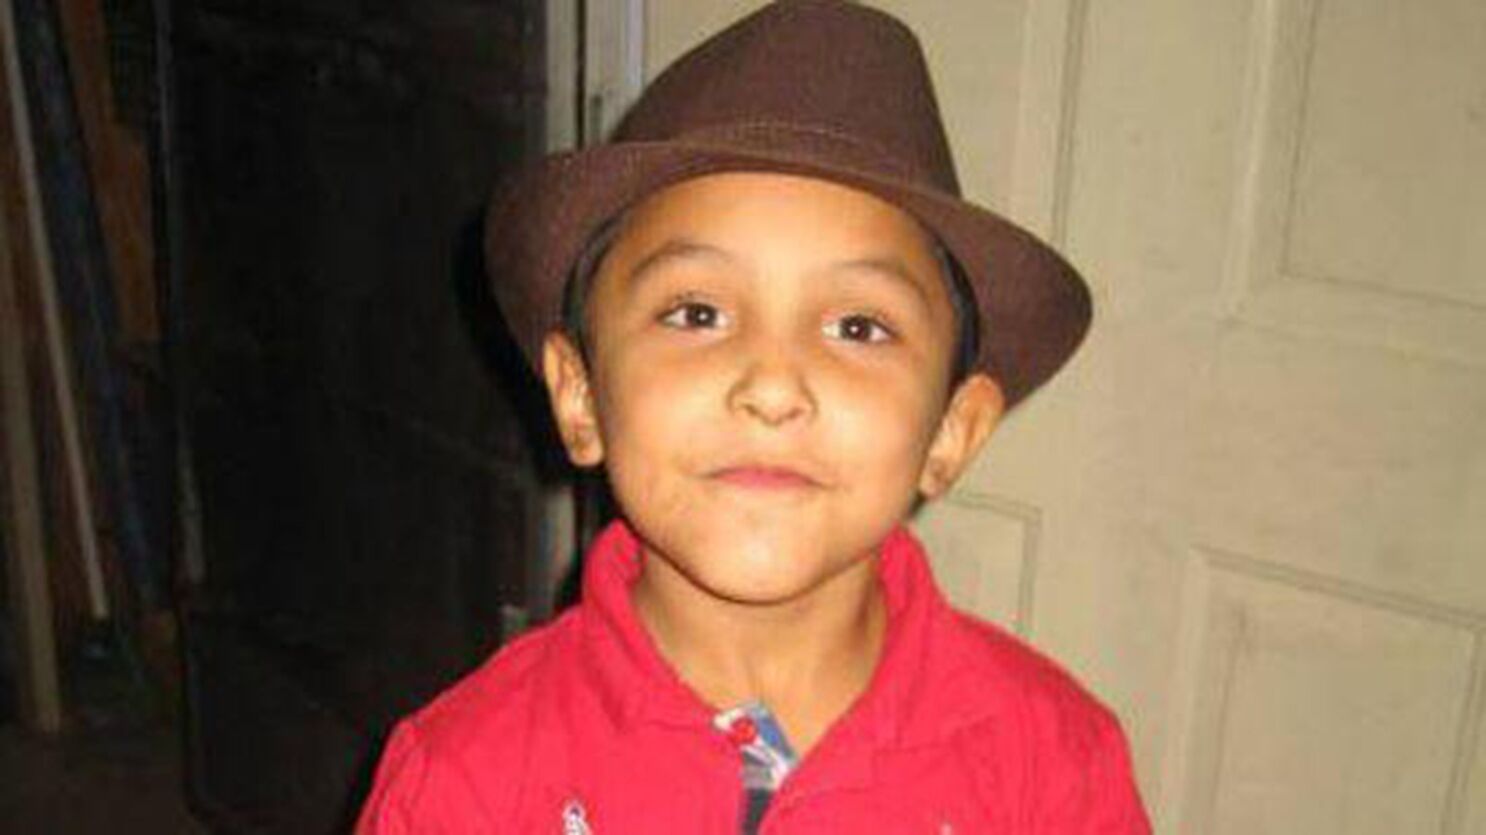 L A Sheriff S Deputies Disciplined After Horrific Torture Death Of 8 Year Old Boy Los Angeles Times